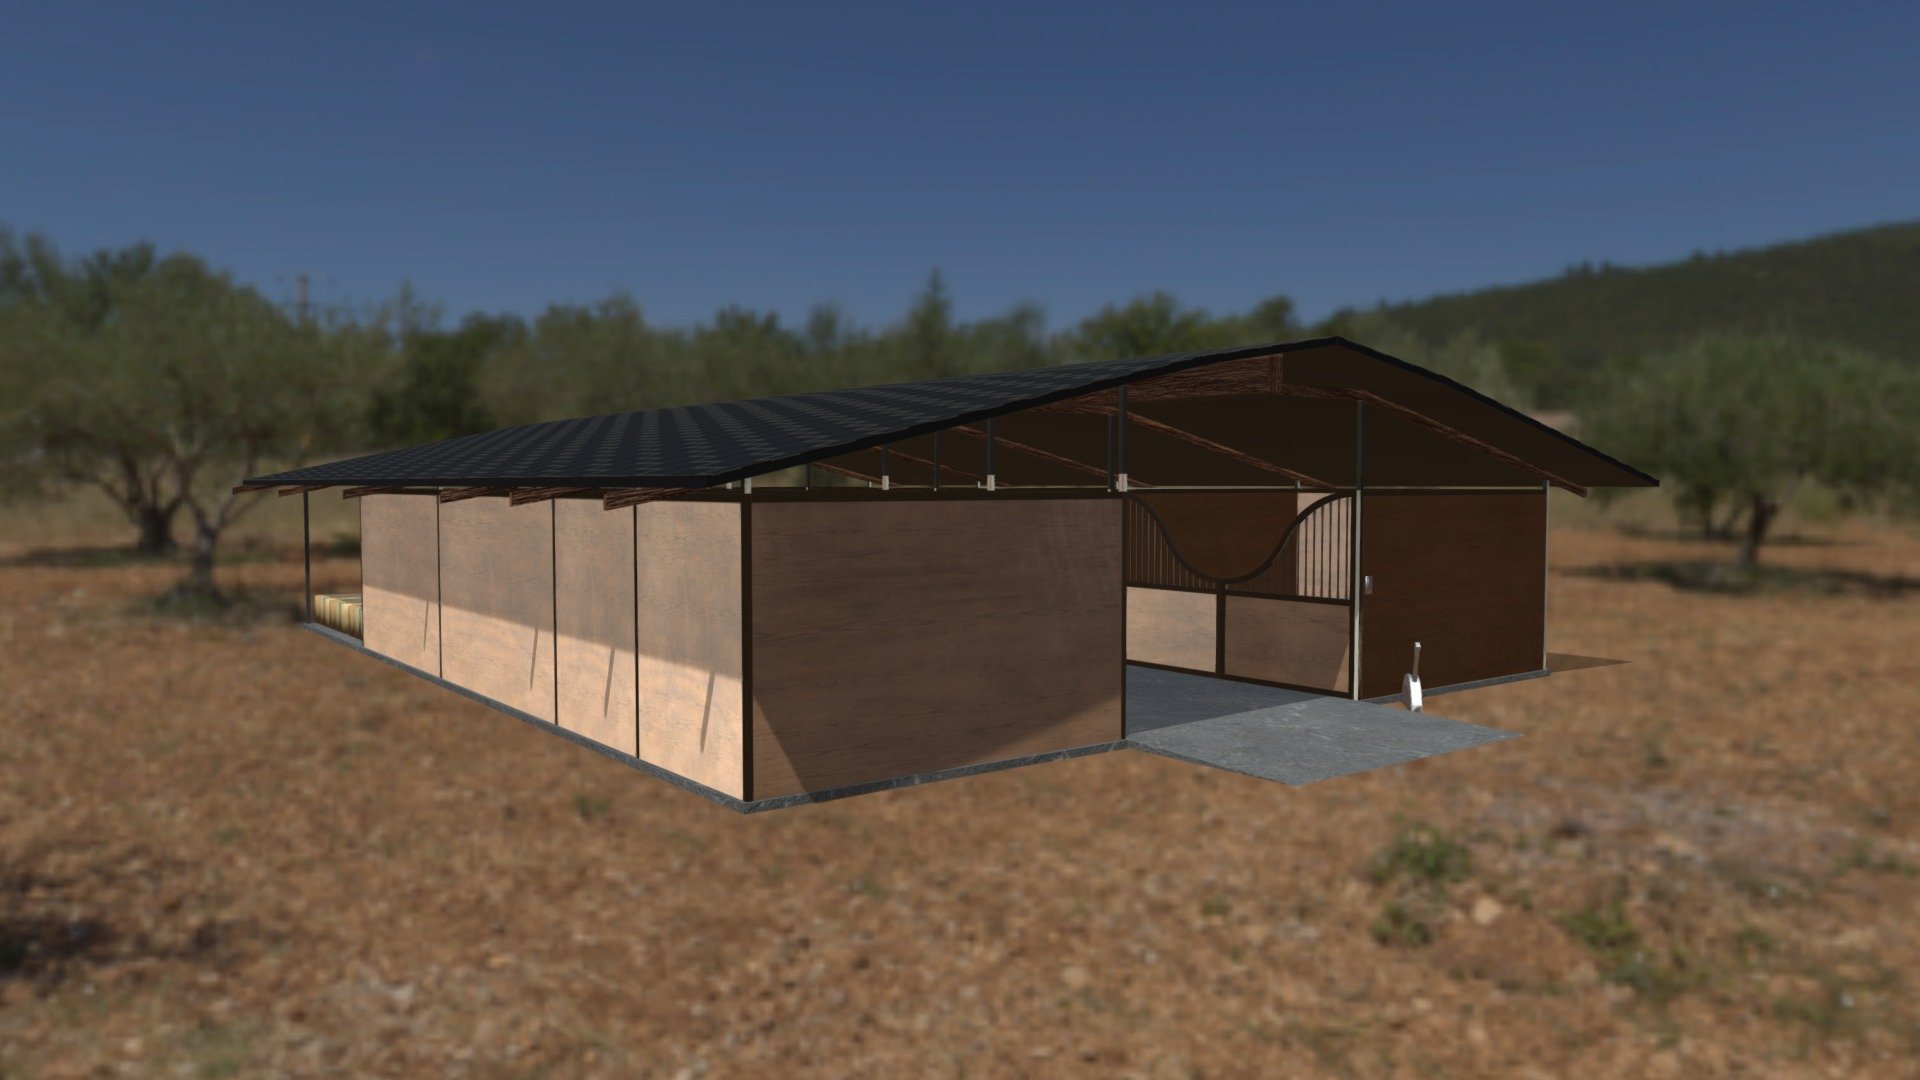 Relatively simple to scale horse stable, with doors, an overhead light, big lever, and hay bales. Nothing too complex. Was originally made for a game map within VRC 3d model